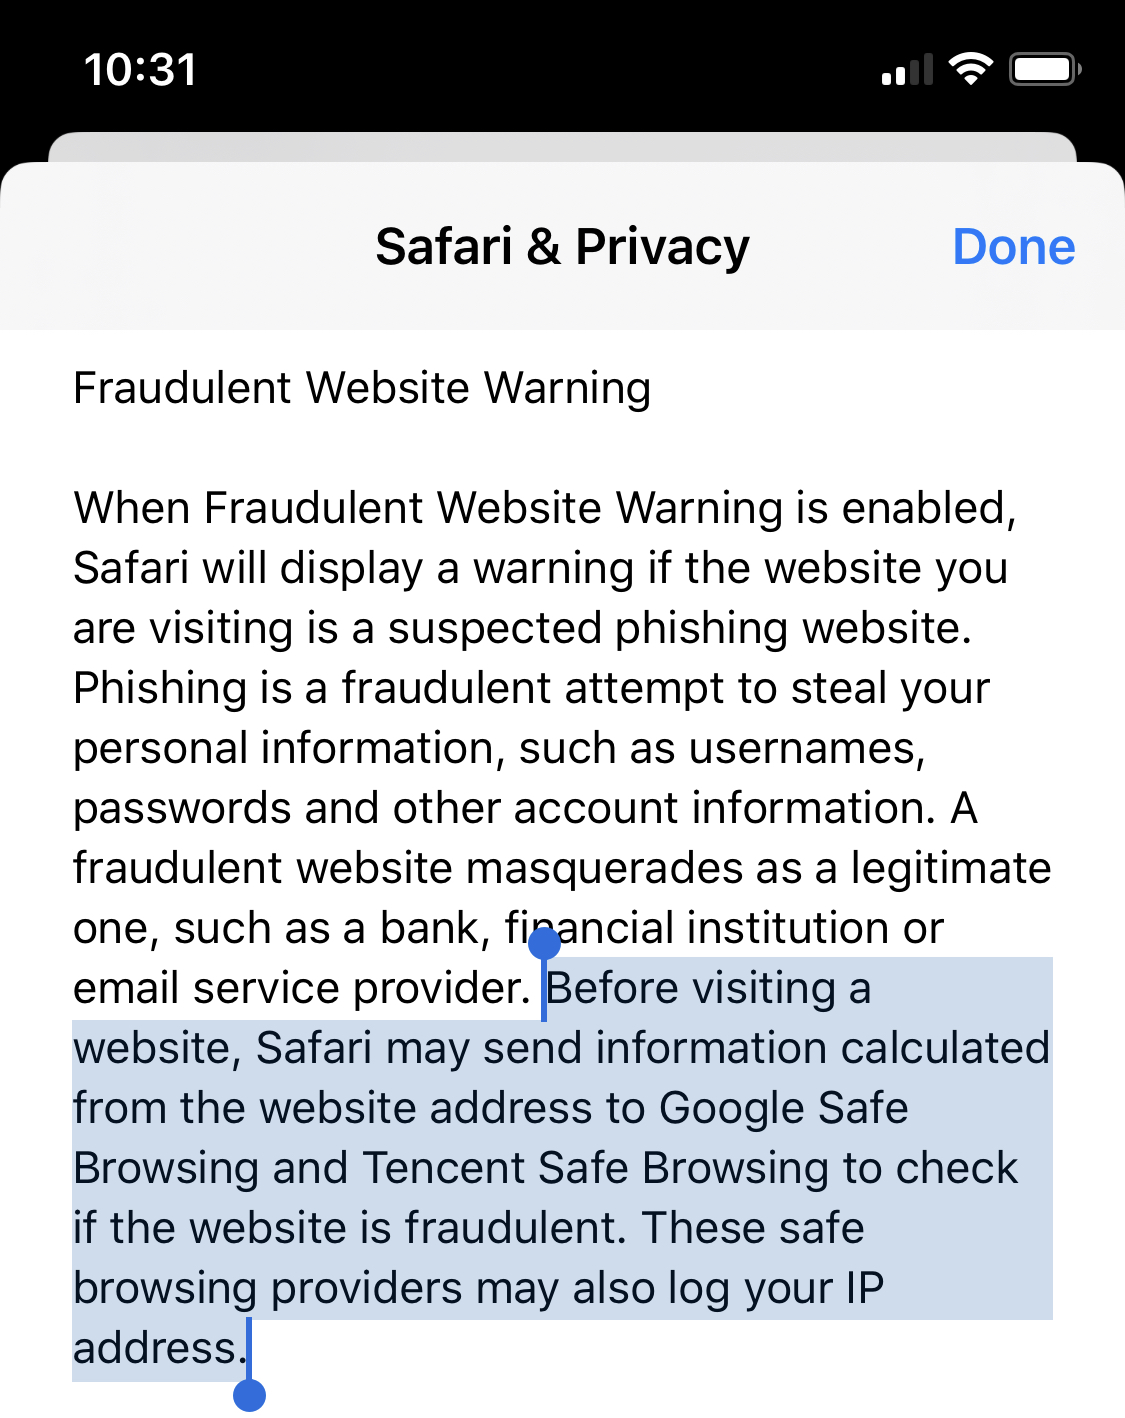 Apple Clarifies Tencent's Role in Fraudulent Website Warnings, Says No URL Data is Shared and Checks are... - MacRumors thumbnail